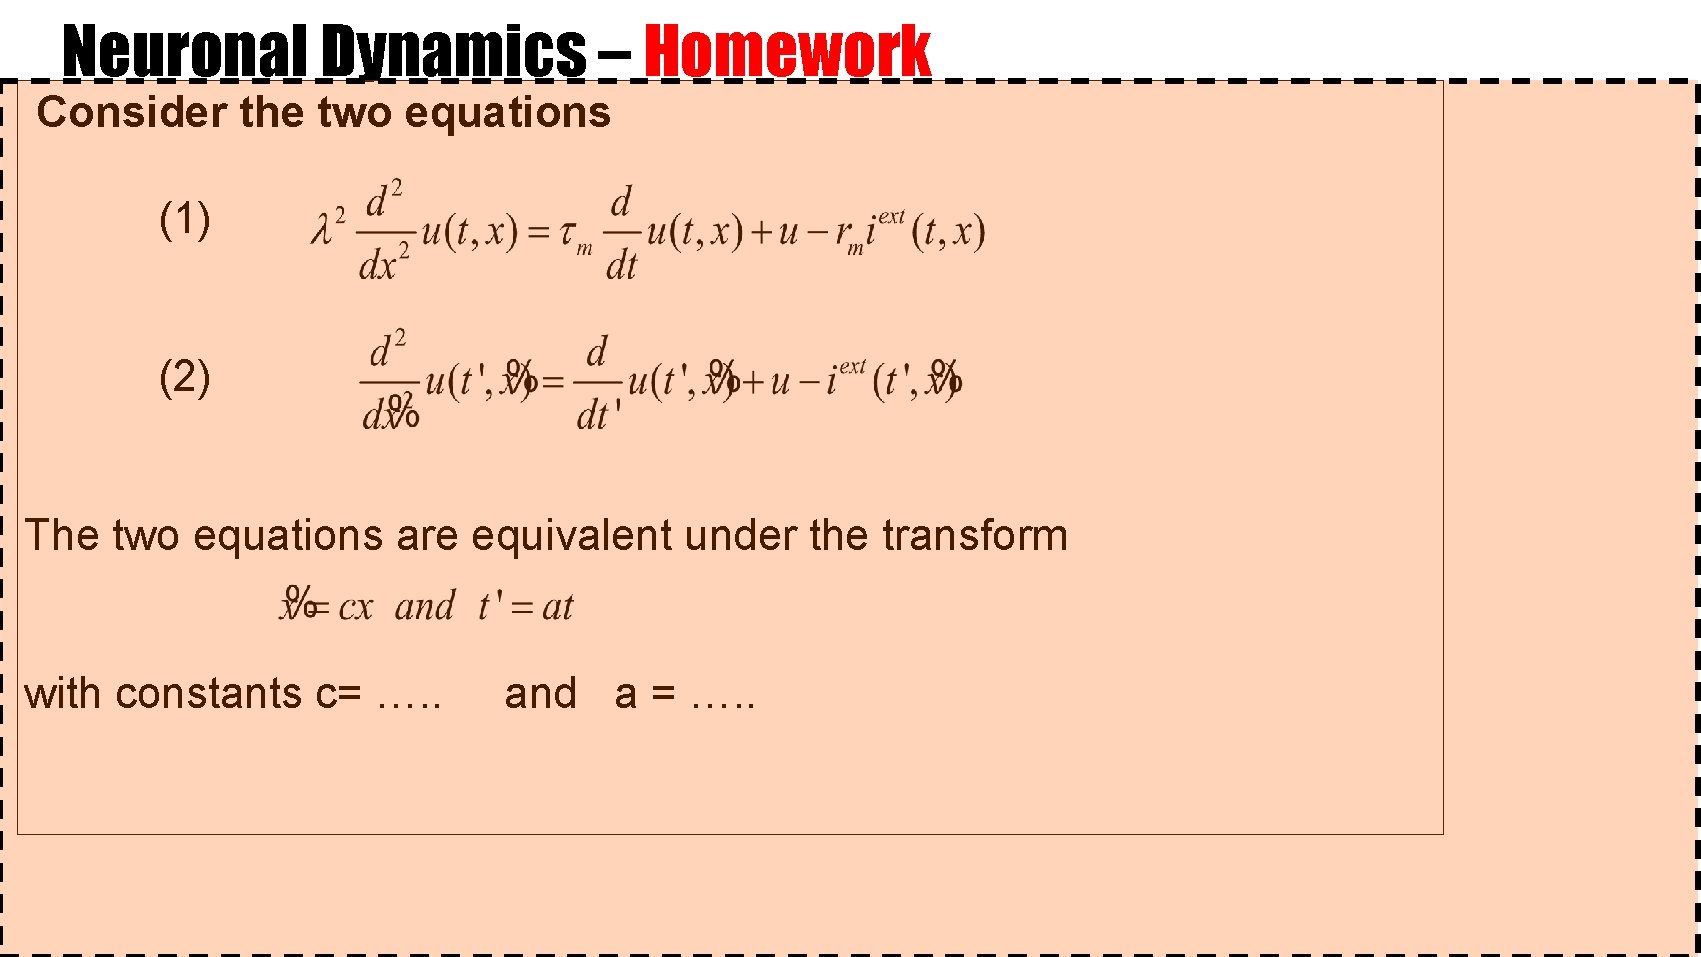 Neuronal Dynamics – Homework Consider the two equations (1) (2) The two equations are